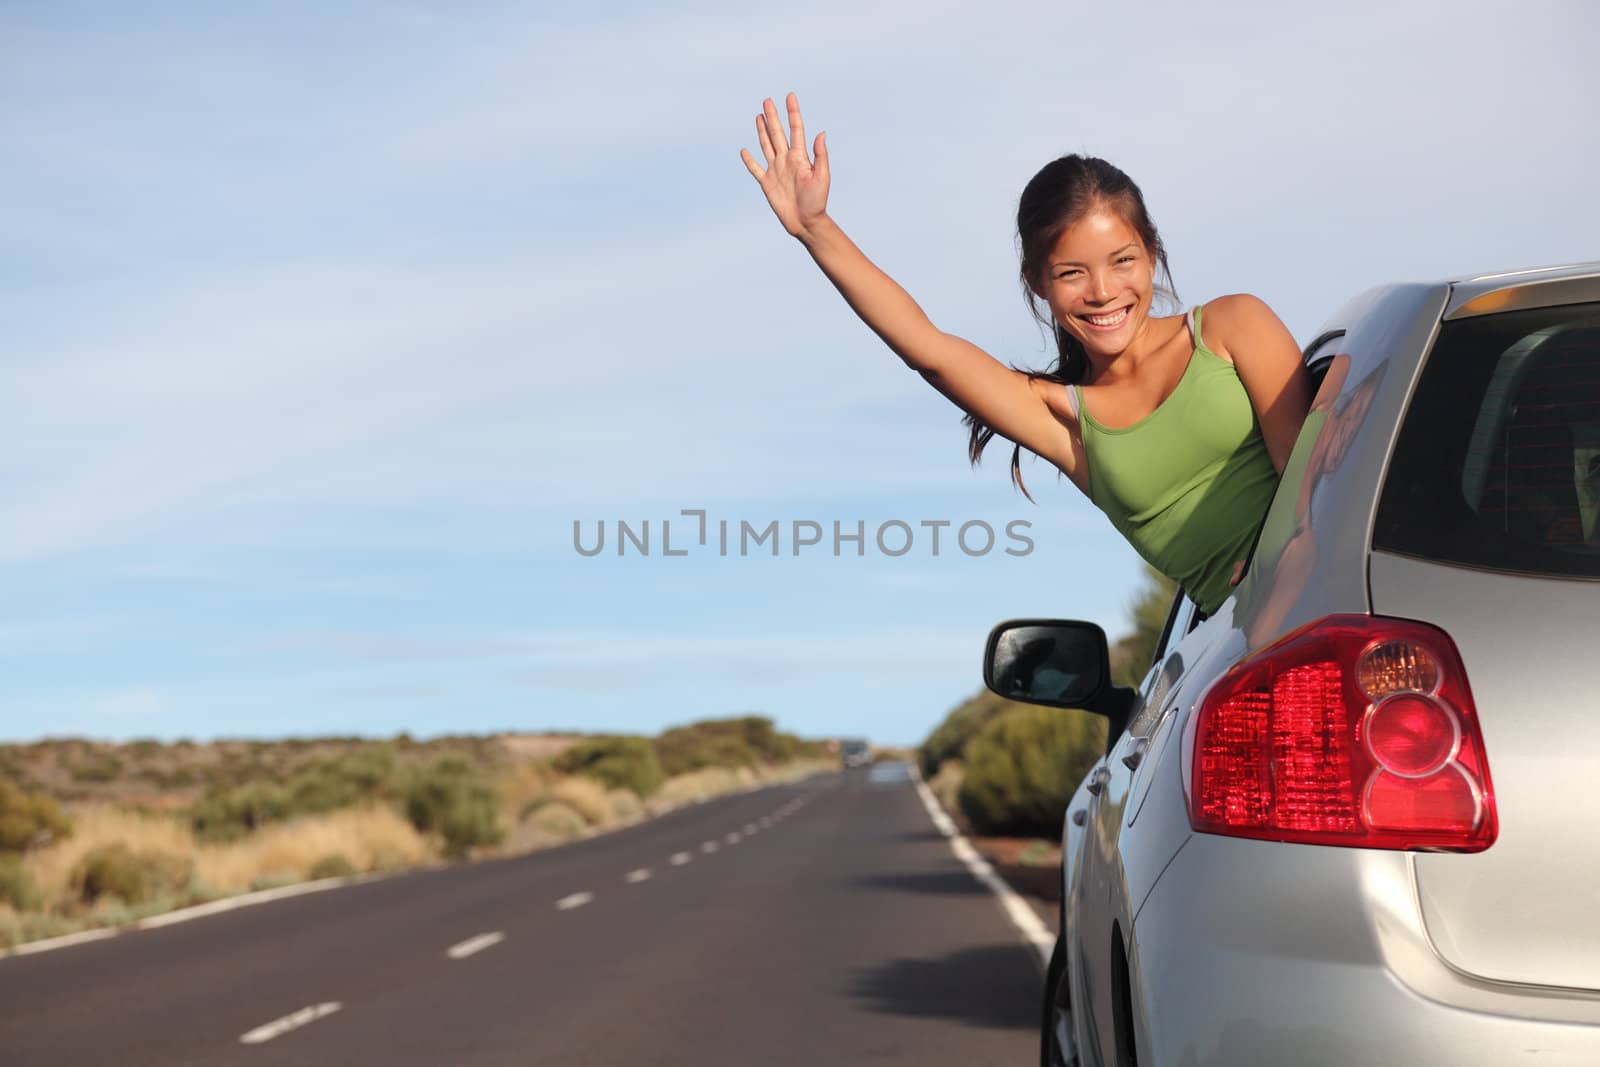 Woman in car road trip waving out the window smiling.  Image from Teide, Tenerife. Mixed race Asian / Caucasian woman.